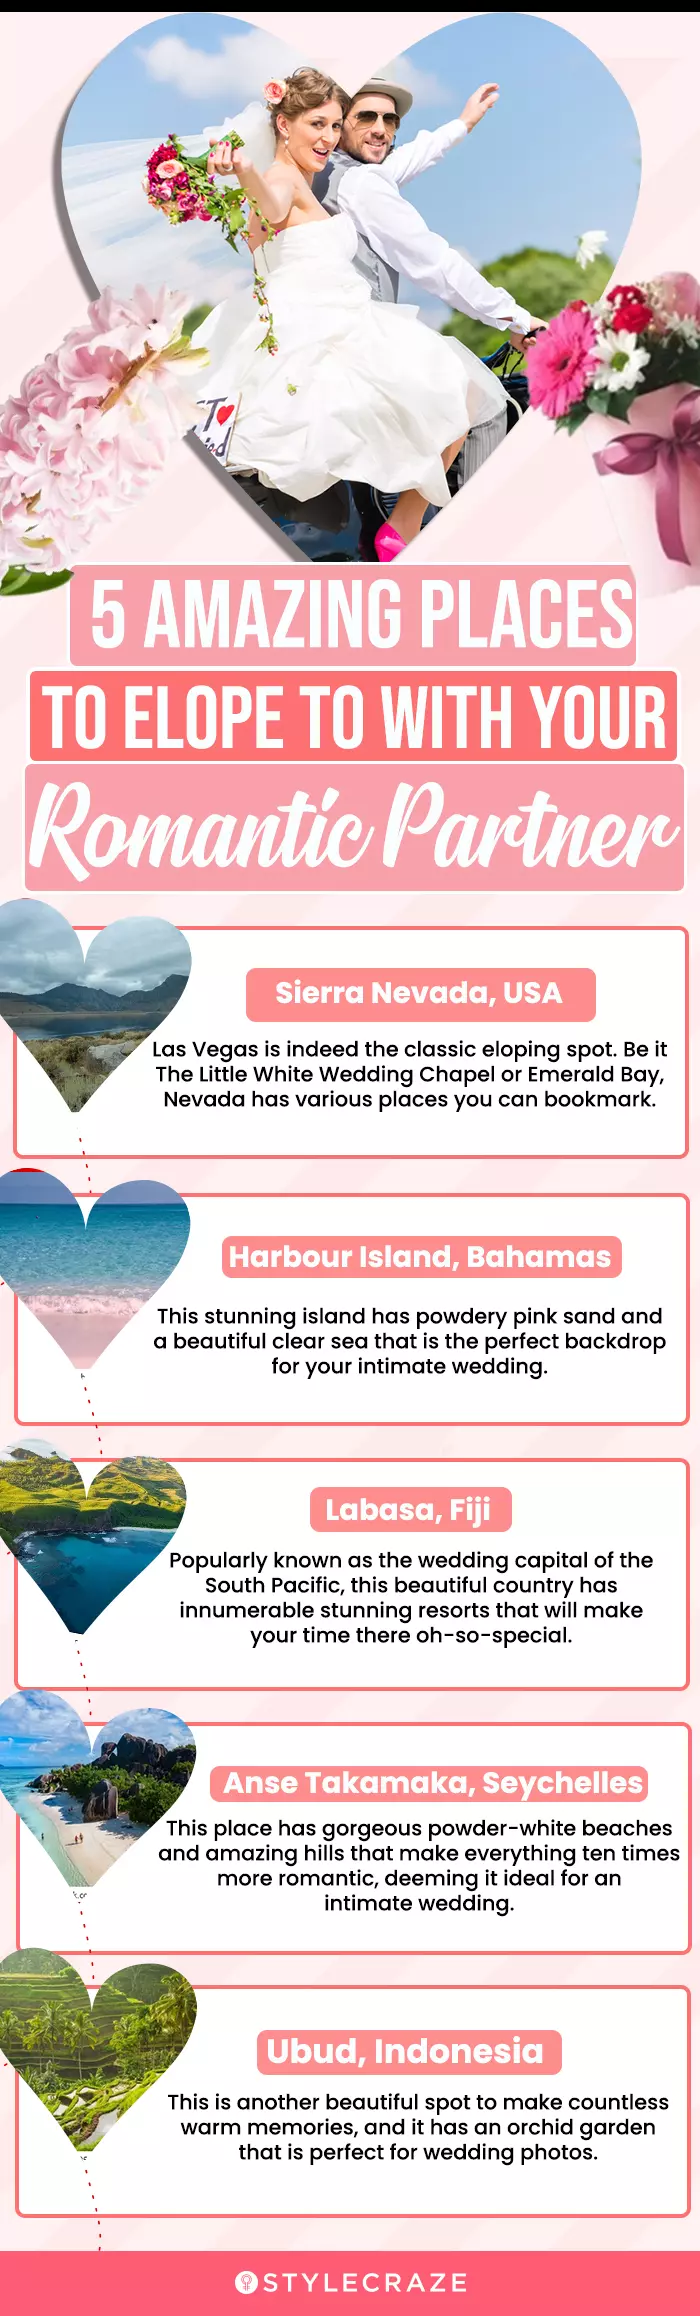 5 amazing places to elope to with your romantic partner (infographic)